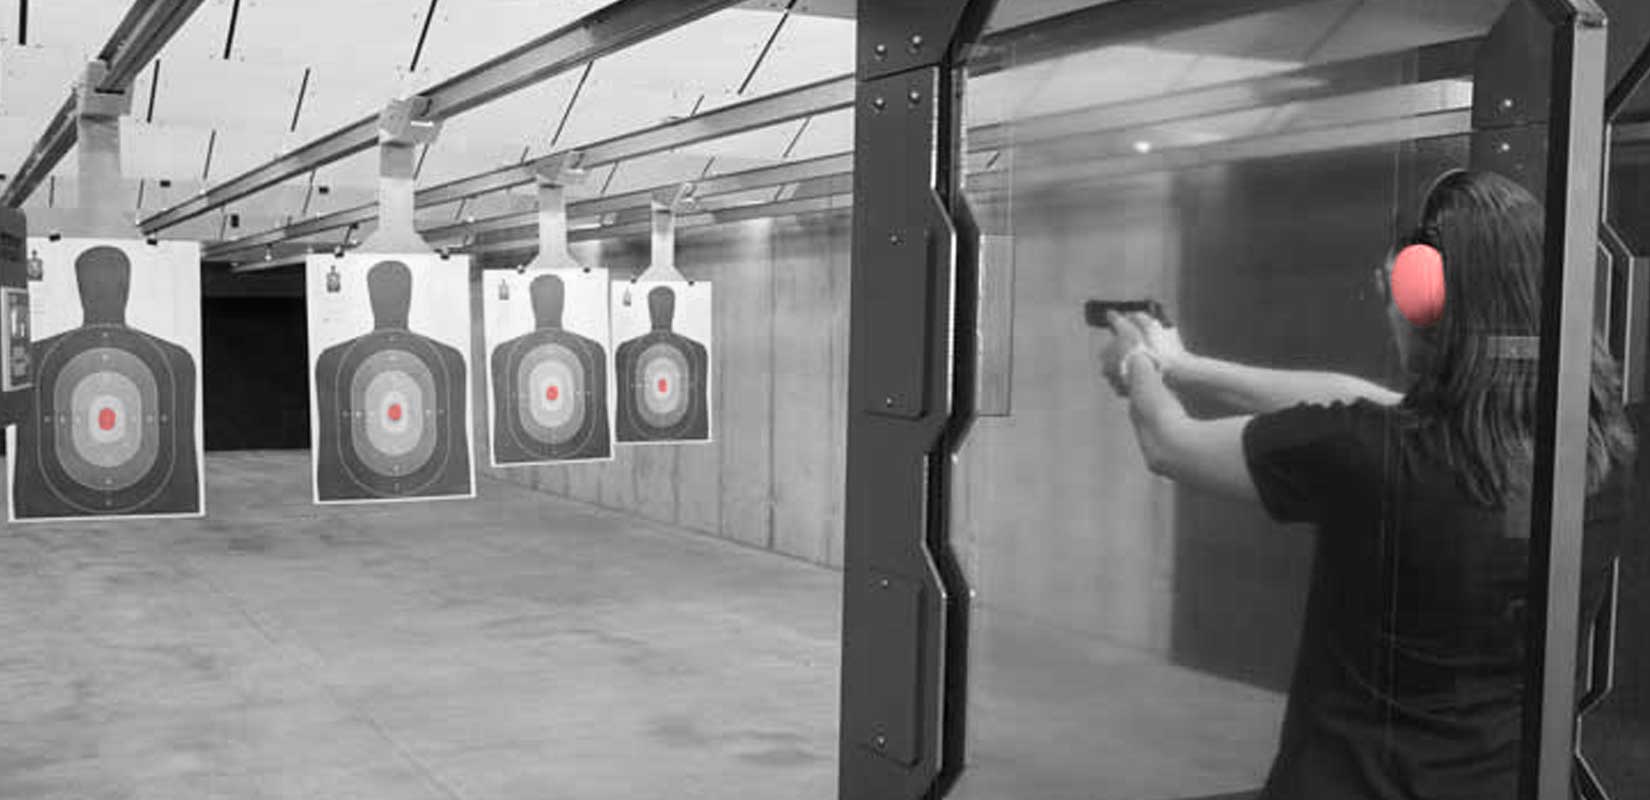 Services Commercial Shooting Range